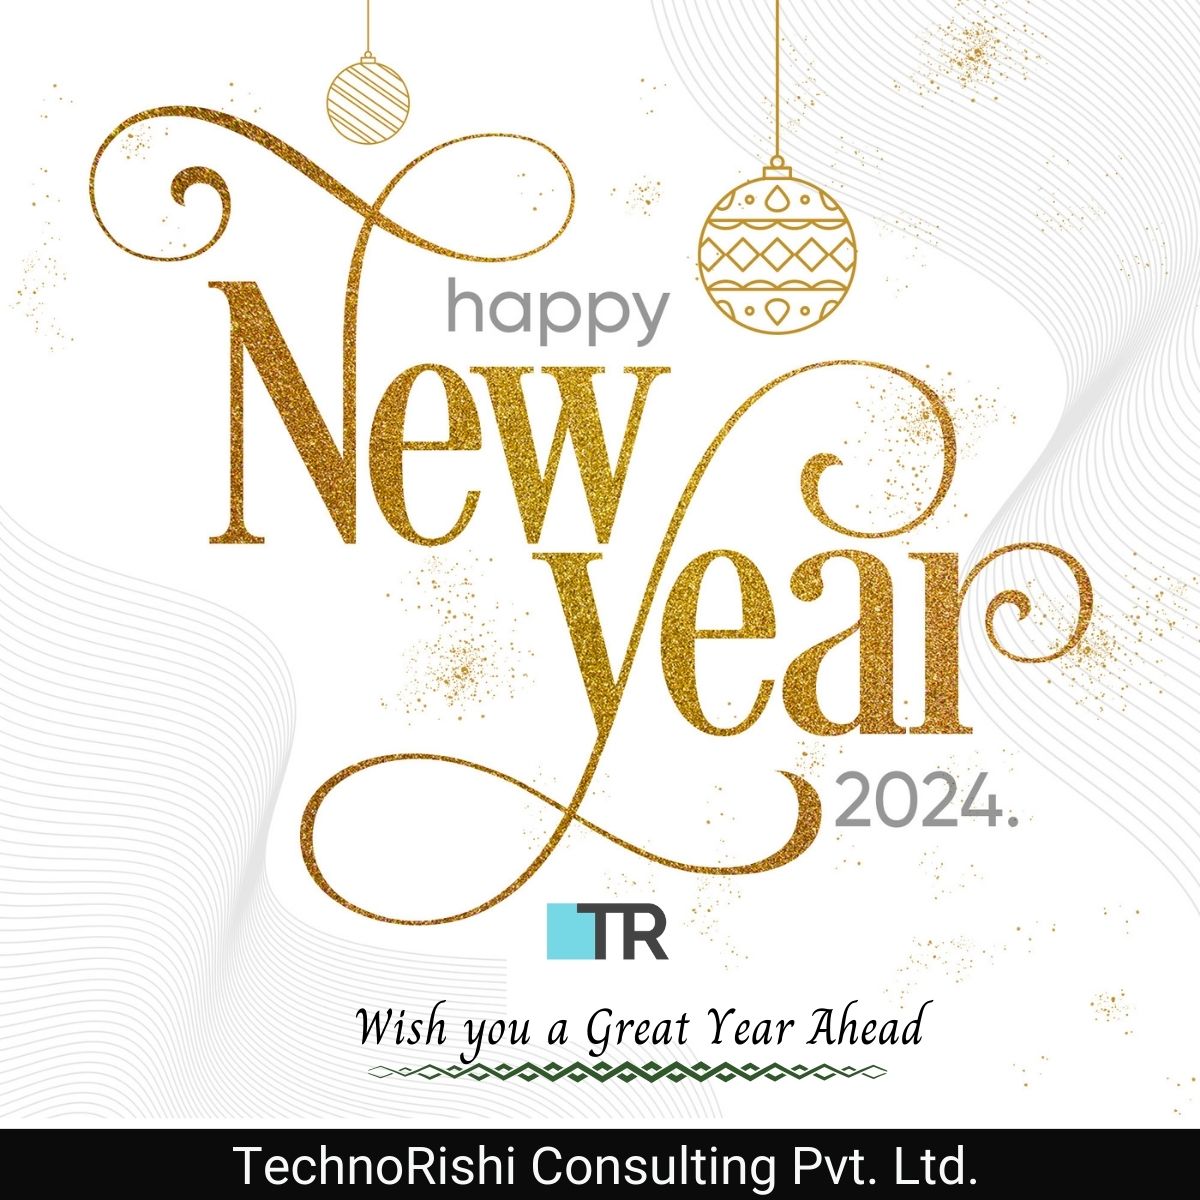 ✨Cheers to new beginnings! 🆕

Wishing you a year filled with joy, success, and endless possibilities.

Happy New Year 2024! 🍰🥳🎈🎊

#newyear2024 #newyearwishes #newyearcelebrations #newyearnewgoals #newyearwishes #successjourney #technorishiconsulting #technorishi